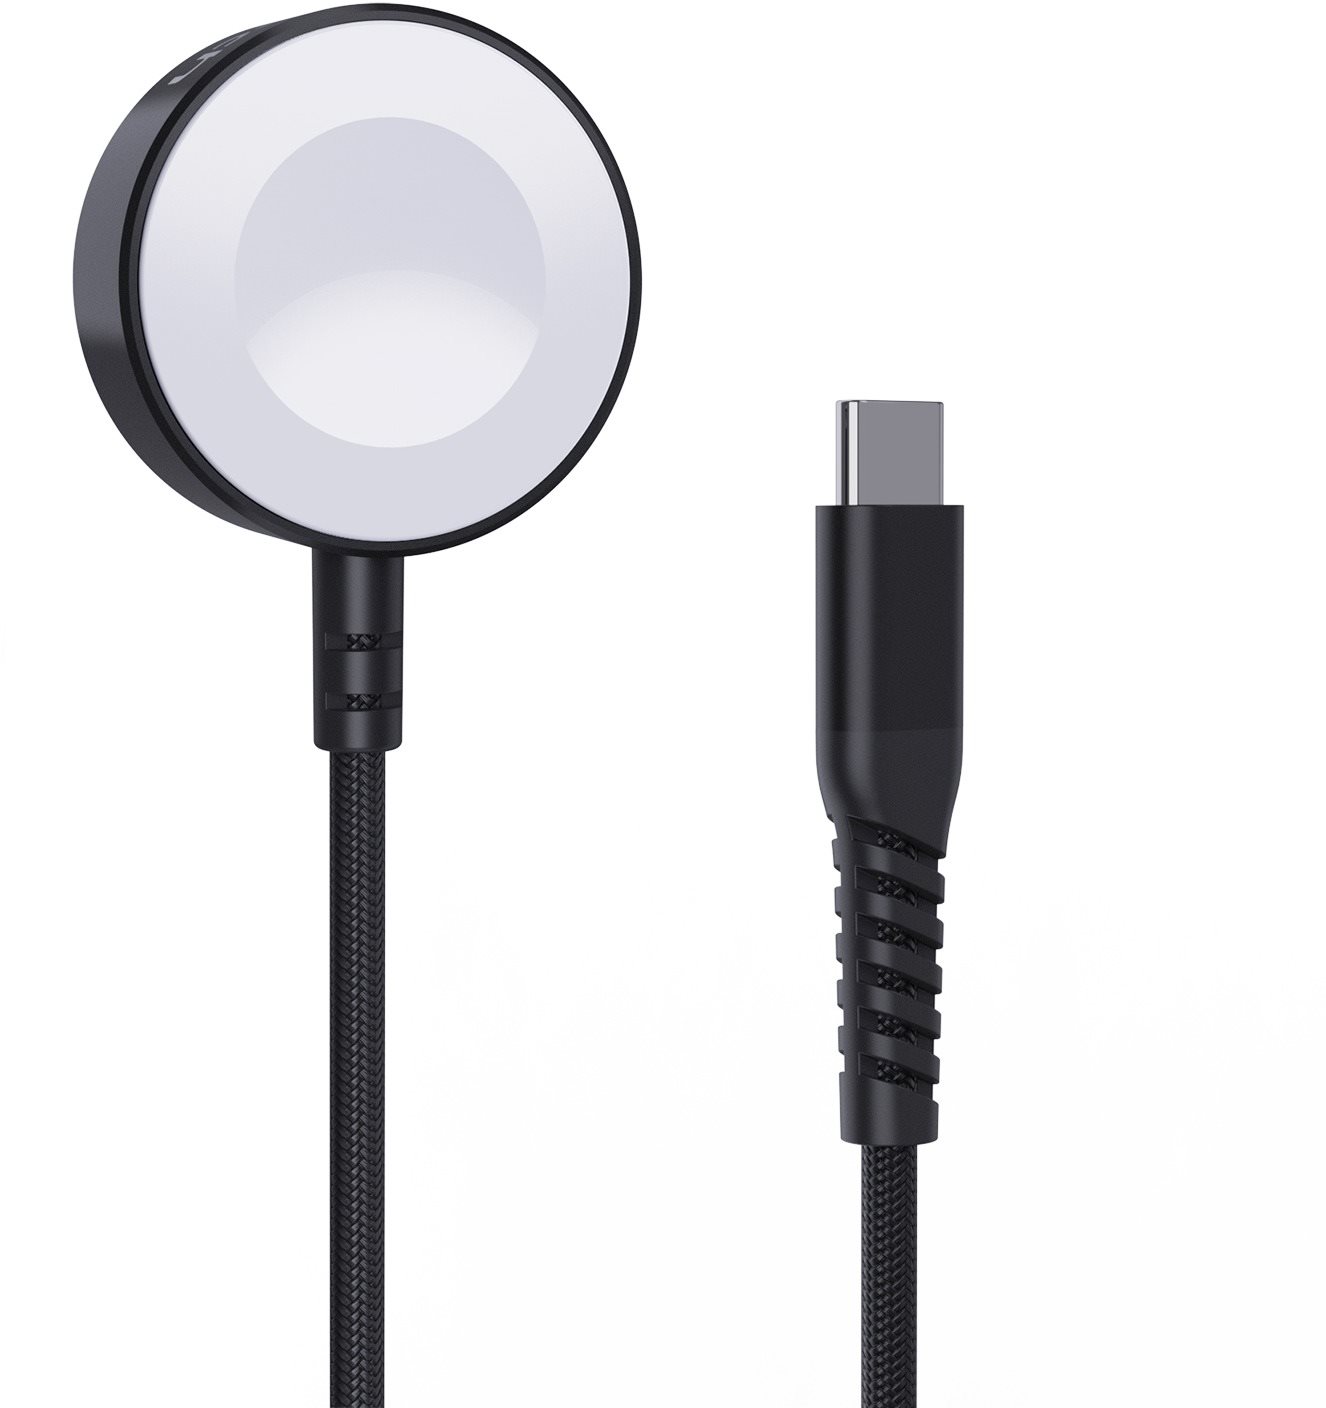 ChoeTech MFi Magnetic Iwatch Charging Cable